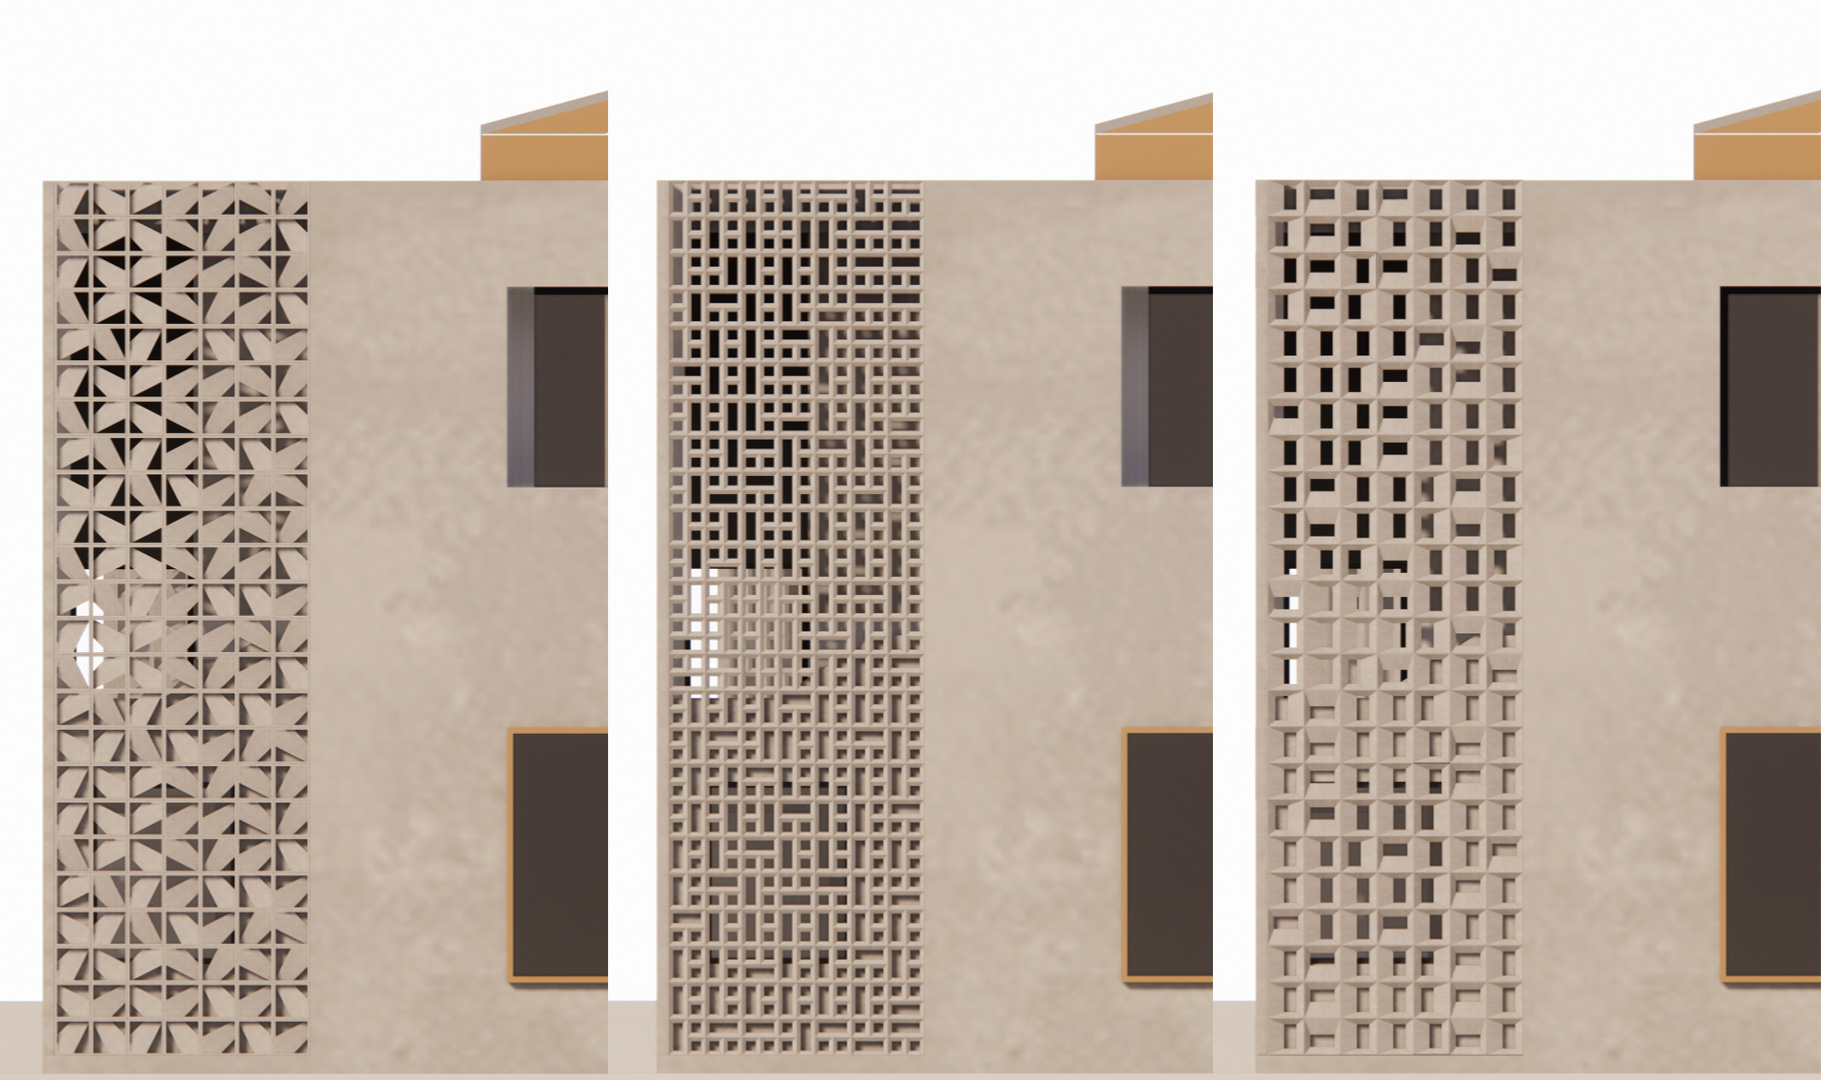 Three different pattern configurations with the breeze blocks